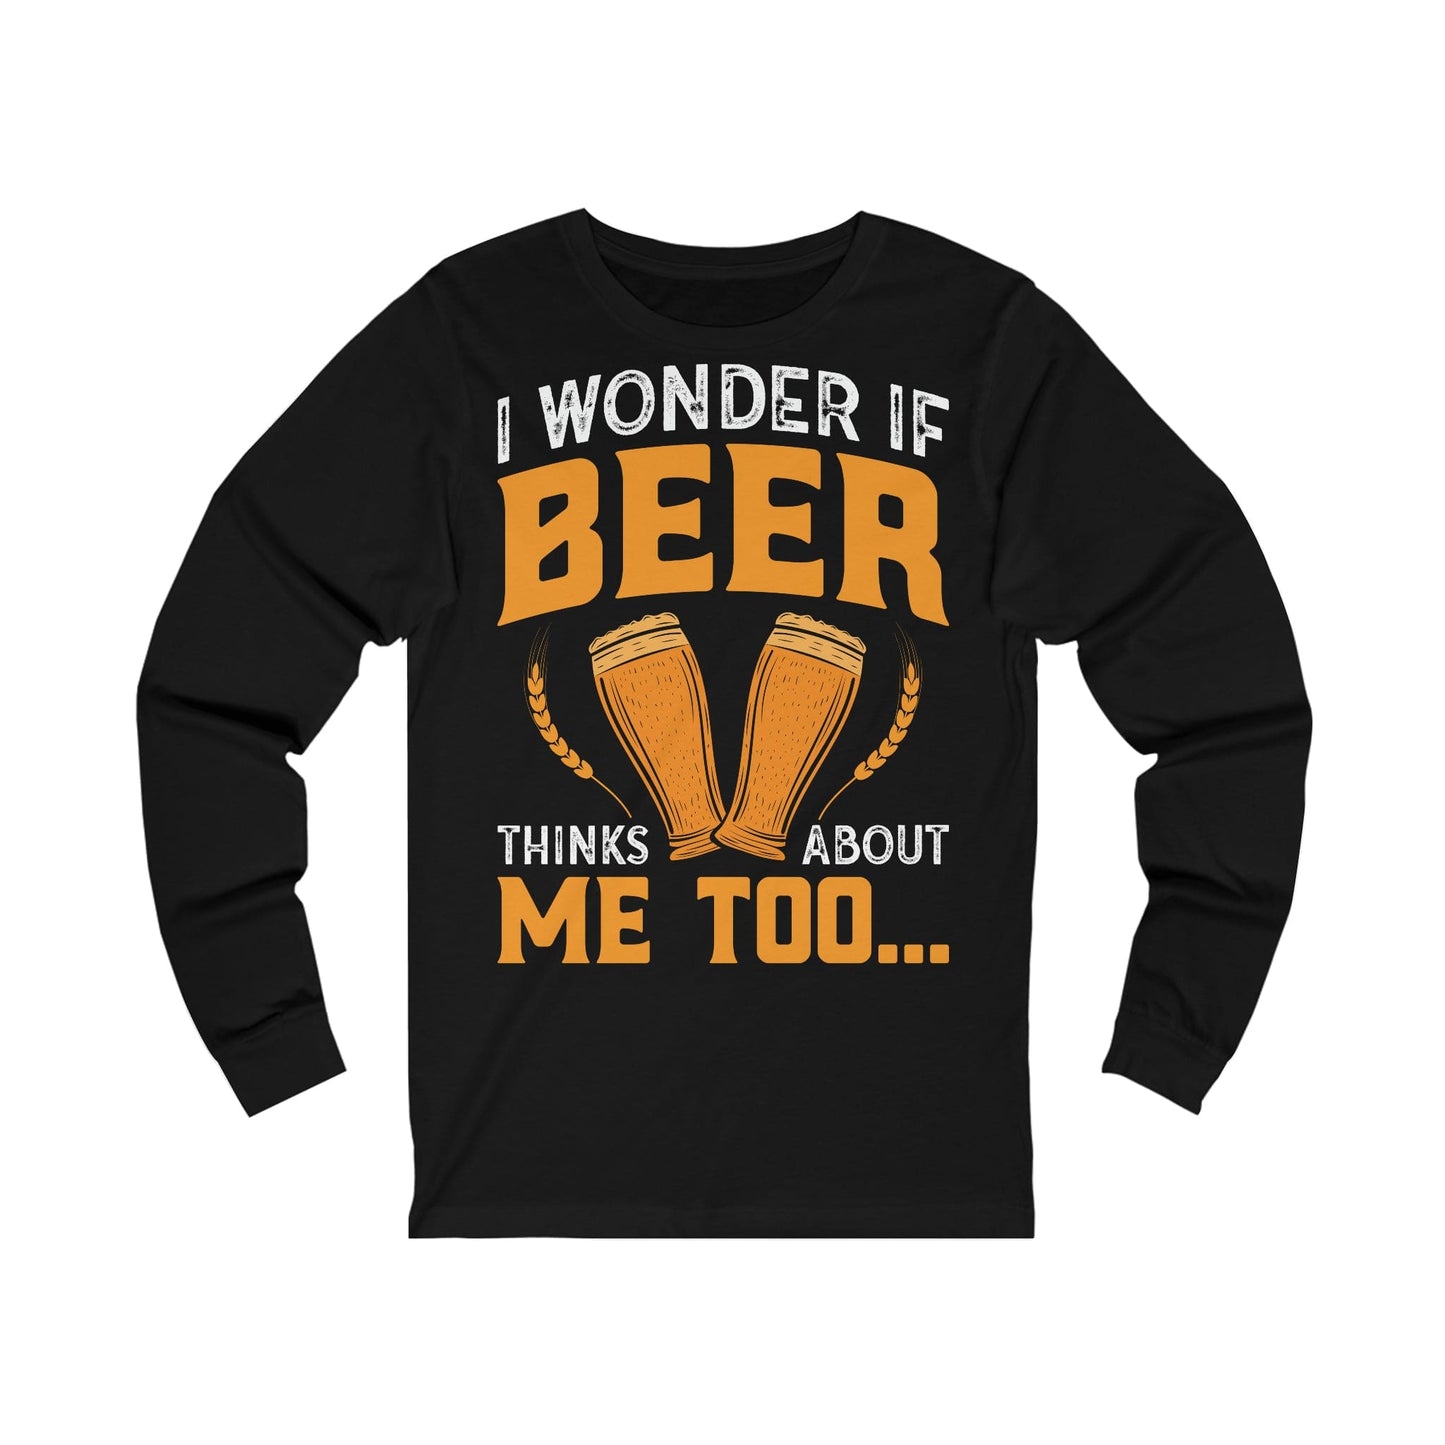 Does Beer think about me too-long sleeve tee